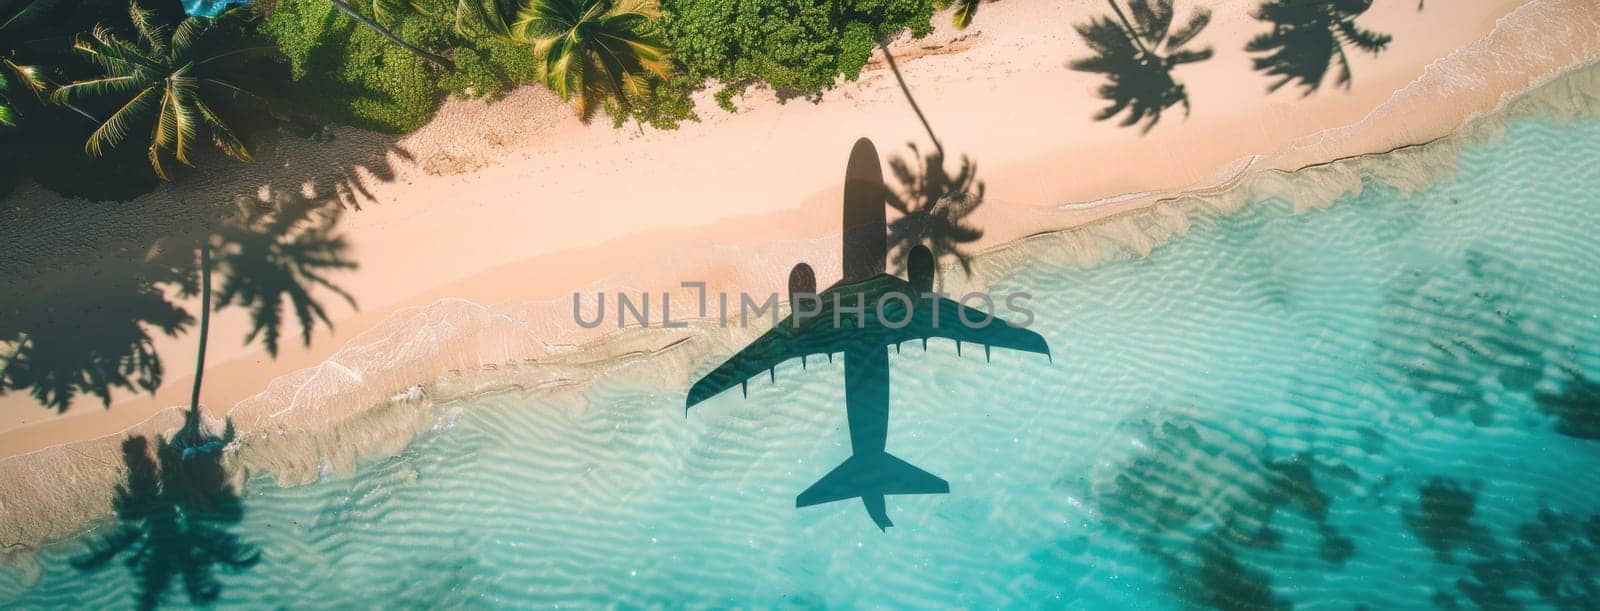 Traveling paradise aerial view of airplane on beach with palm trees on sandy shore by Vichizh